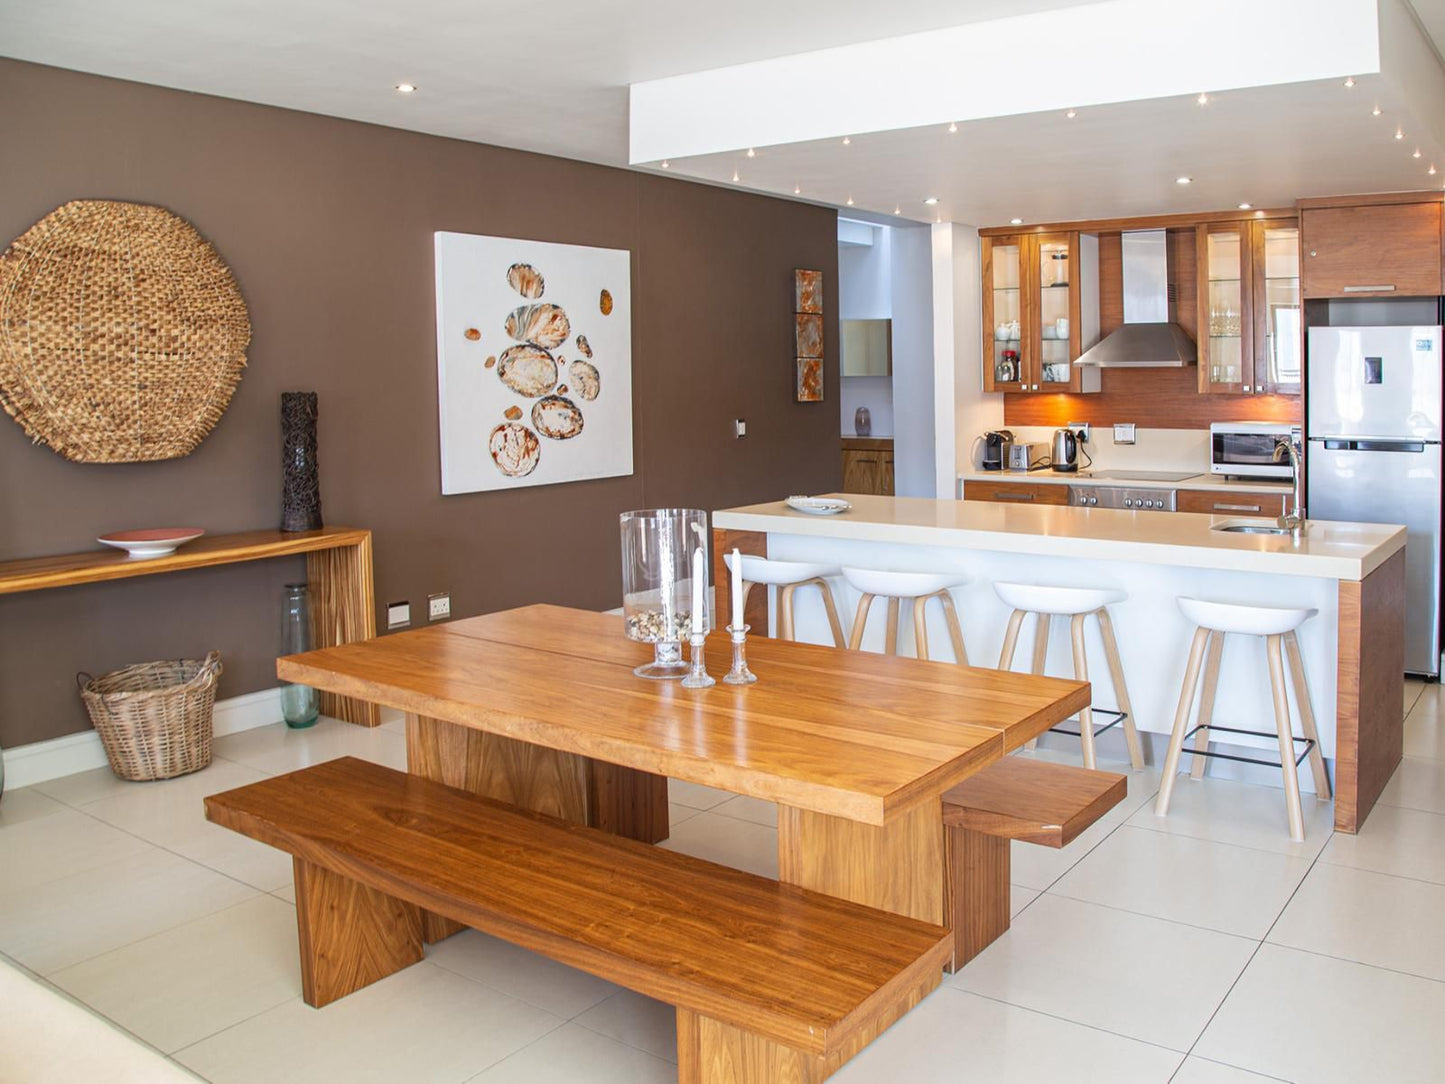 Marine Square Luxury Holiday Suites Hermanus Western Cape South Africa 